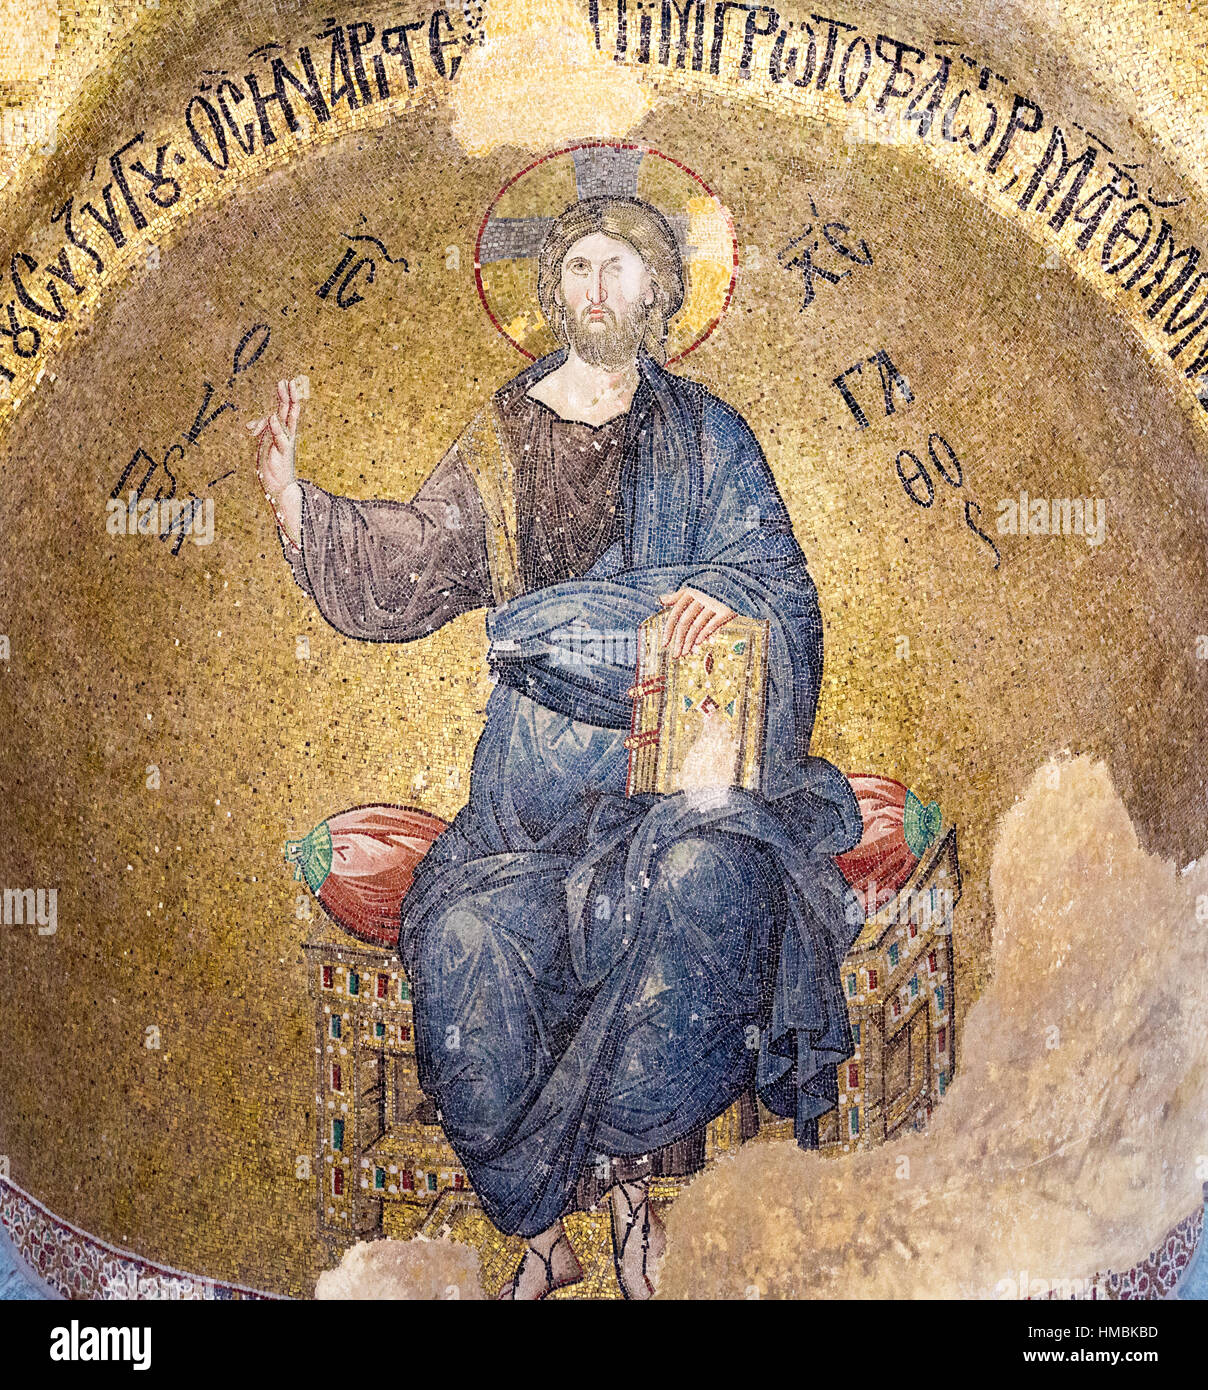 Byzantine Mosaic of Christ pantocrator, sitting on a throne, Pammakaristos church in Istanbul, Tyrkey - October 11, 2013 Stock Photo